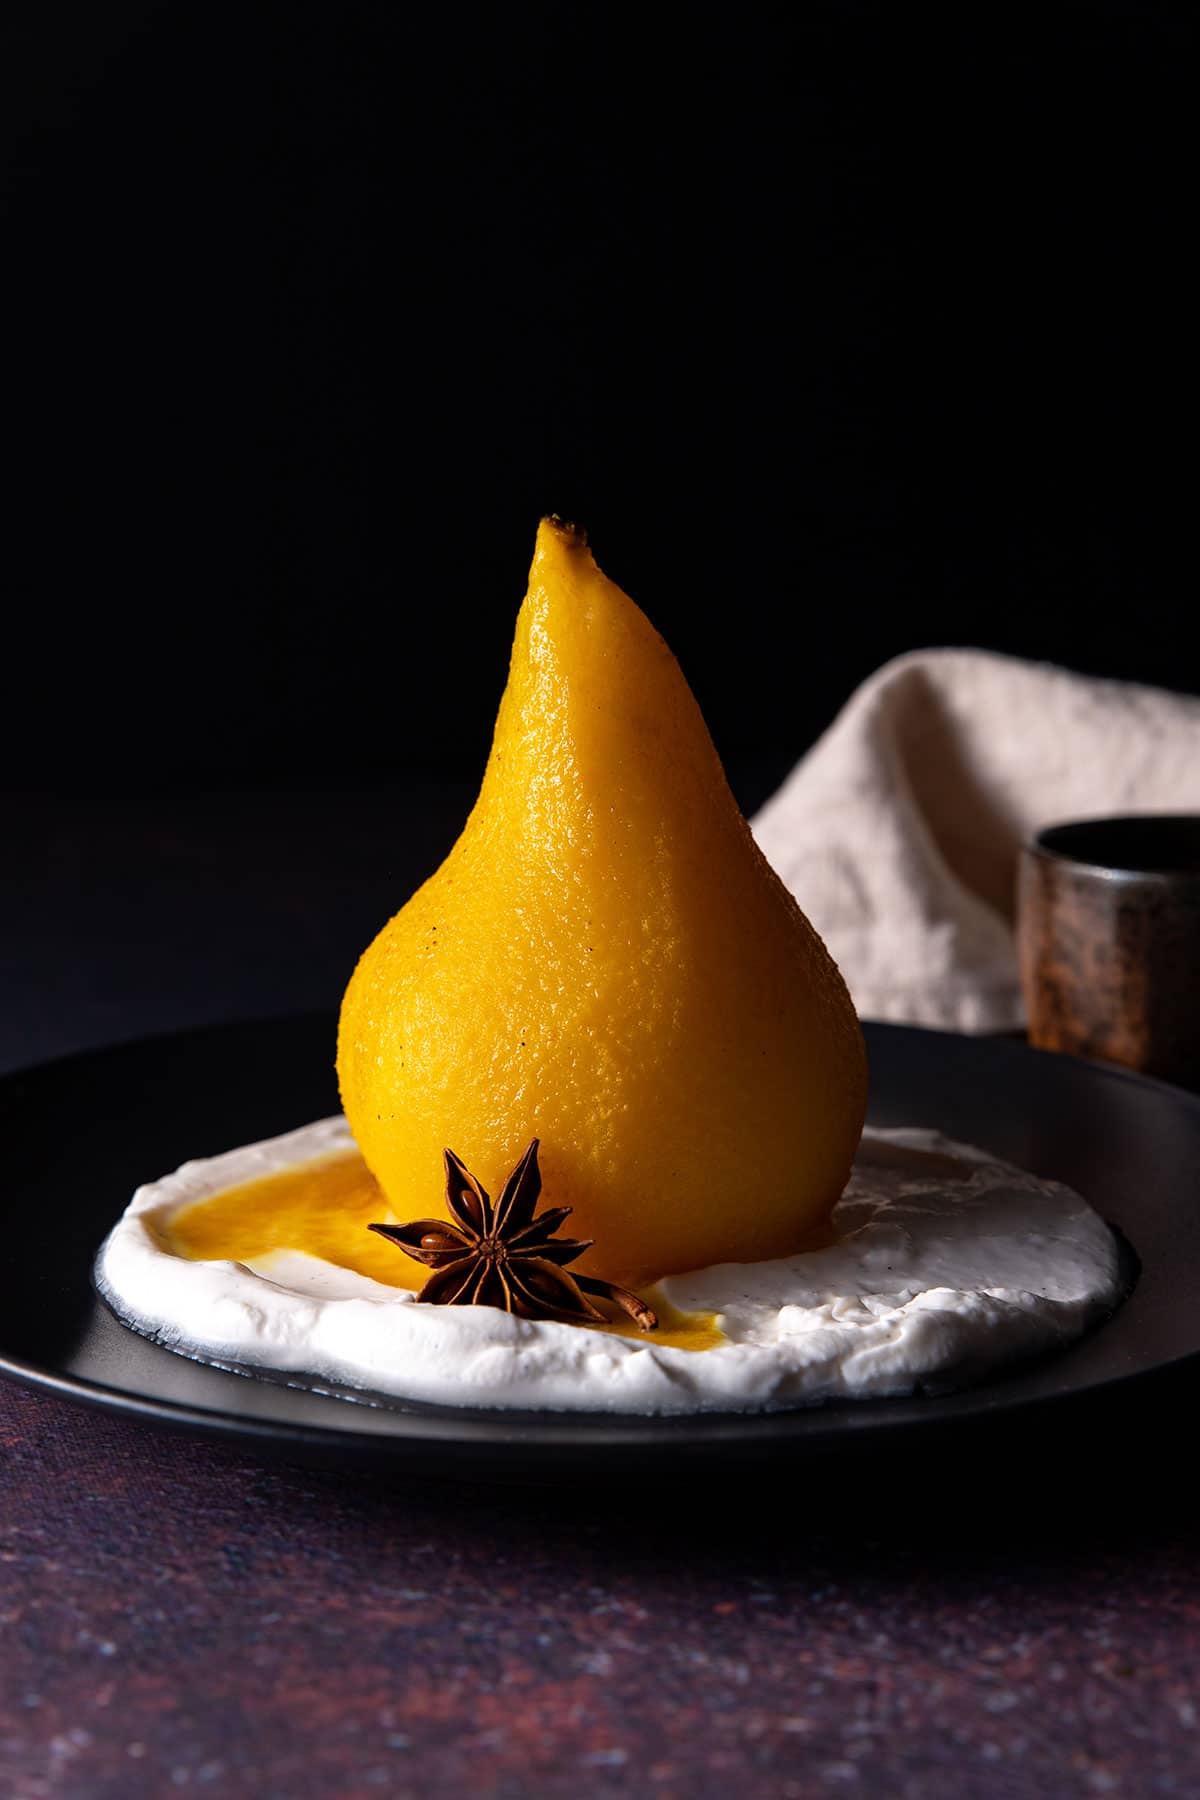 A close up picture of a whole, golden coloured poached pear sitting on a black plate, with coconut yoghurt, a drizzle of poaching liquid, and a star anise.